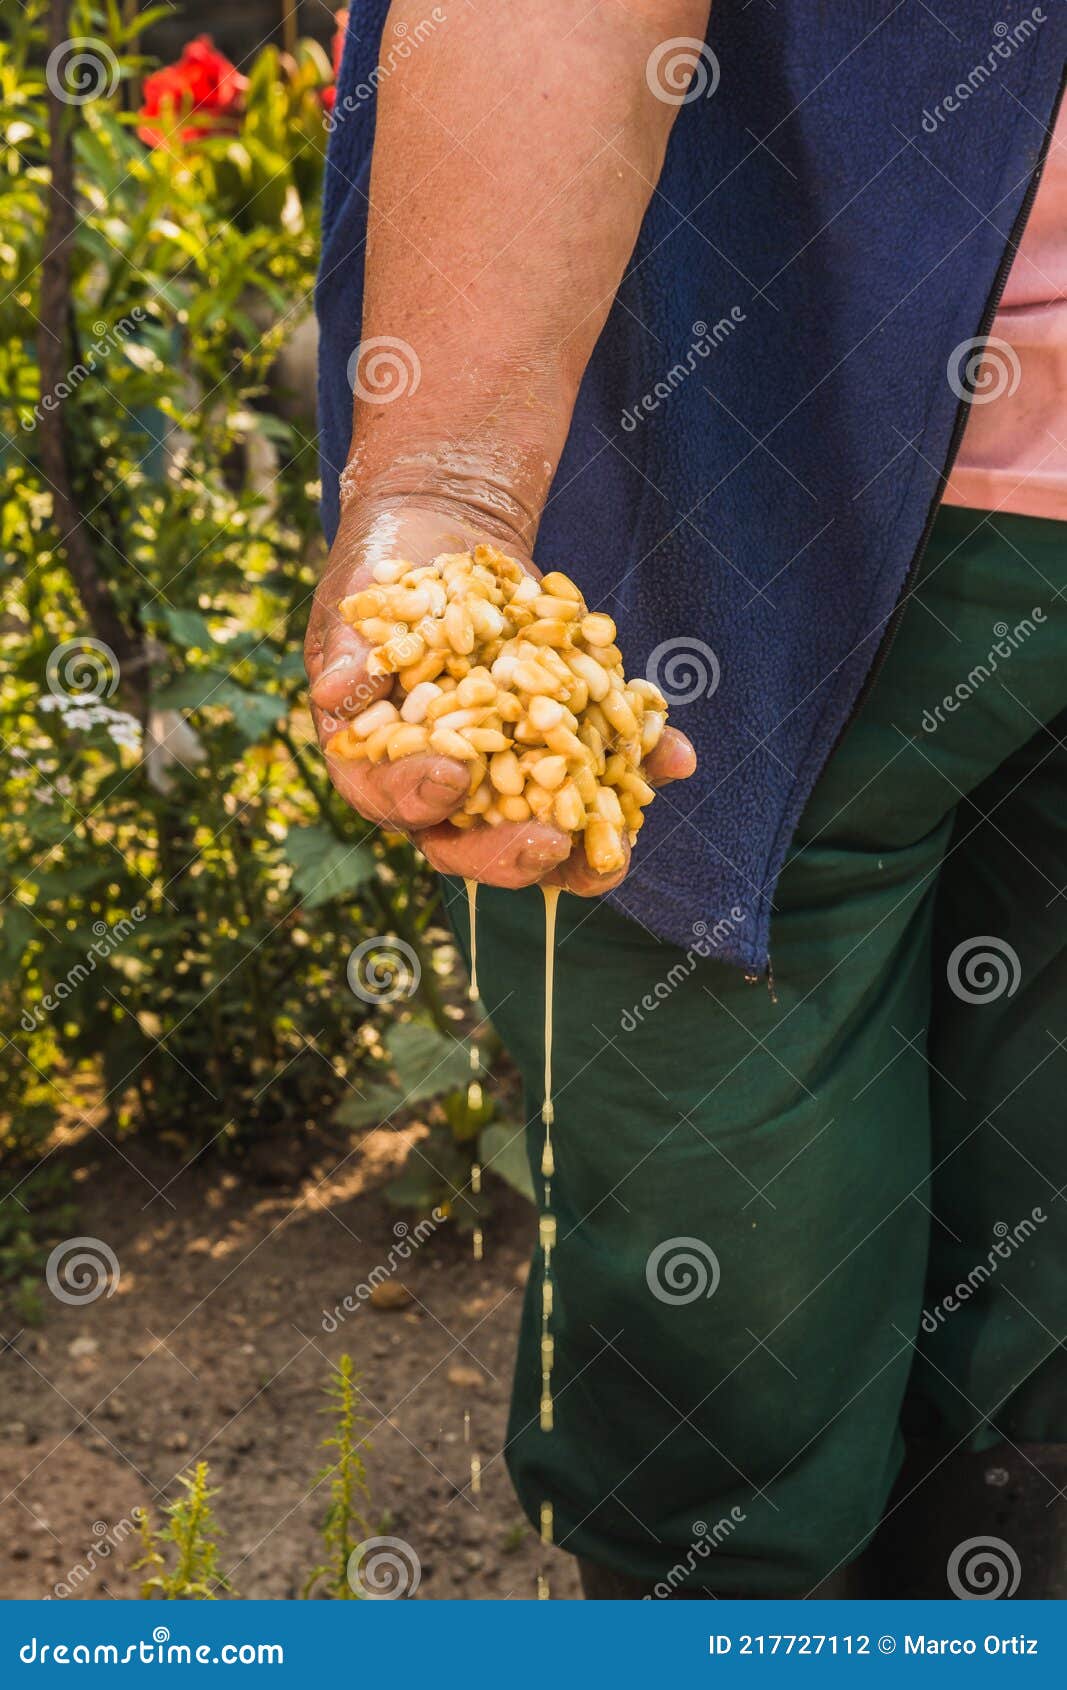 mexican indigenous woman preparing the traditional nixtamal made of white corn